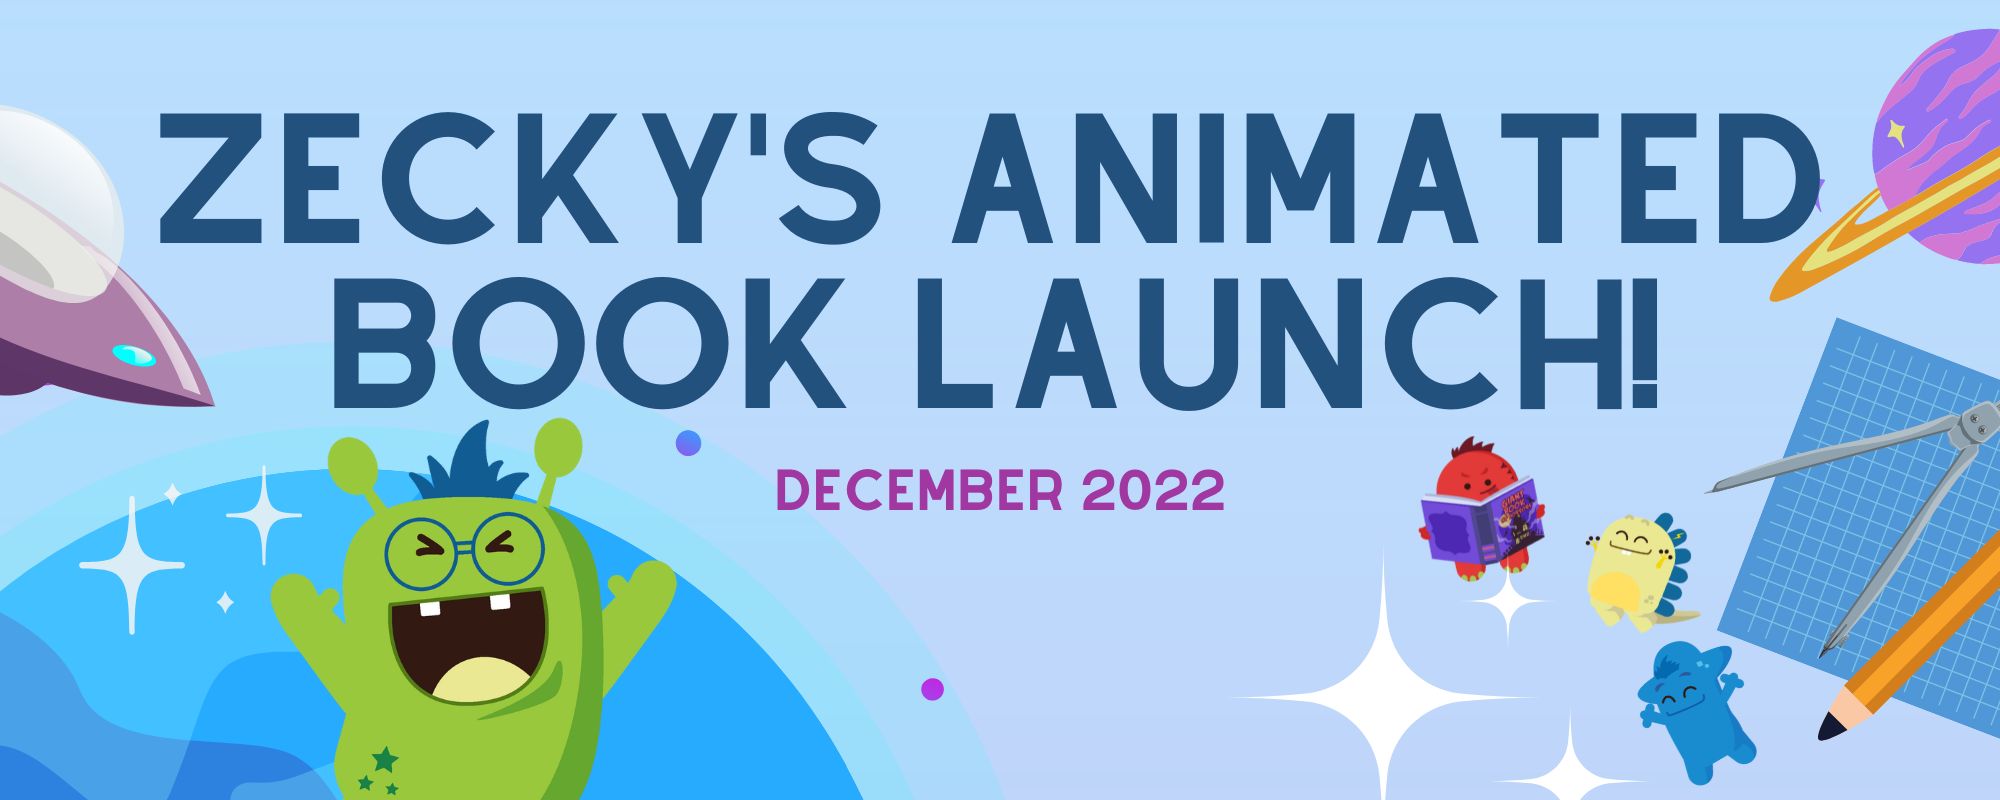 Zecky’s Animated Book Launch image